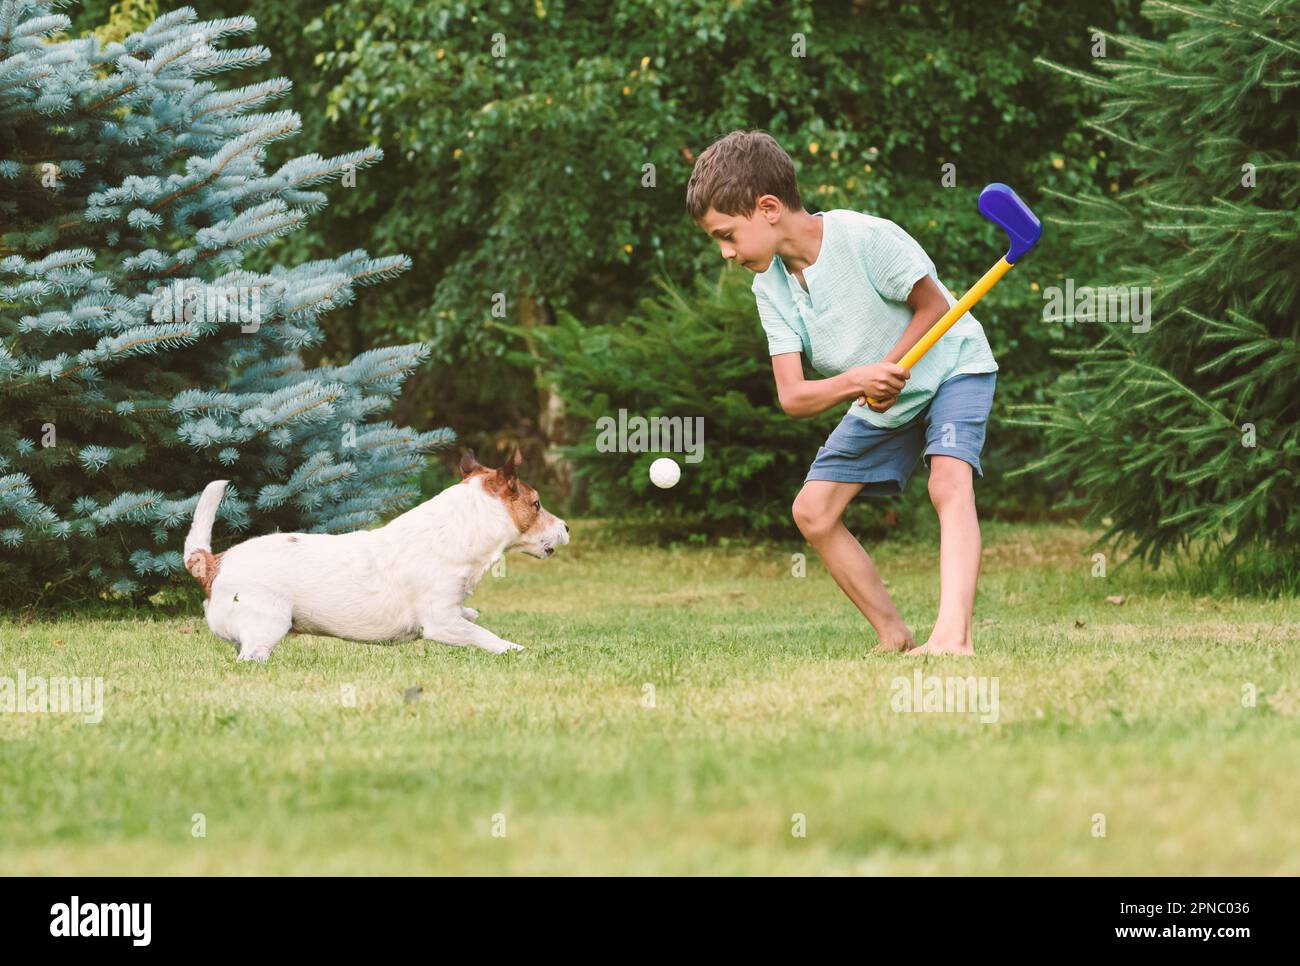 Small kid playing golf at backyard lawn and dog intercepting and catching ball Stock Photo